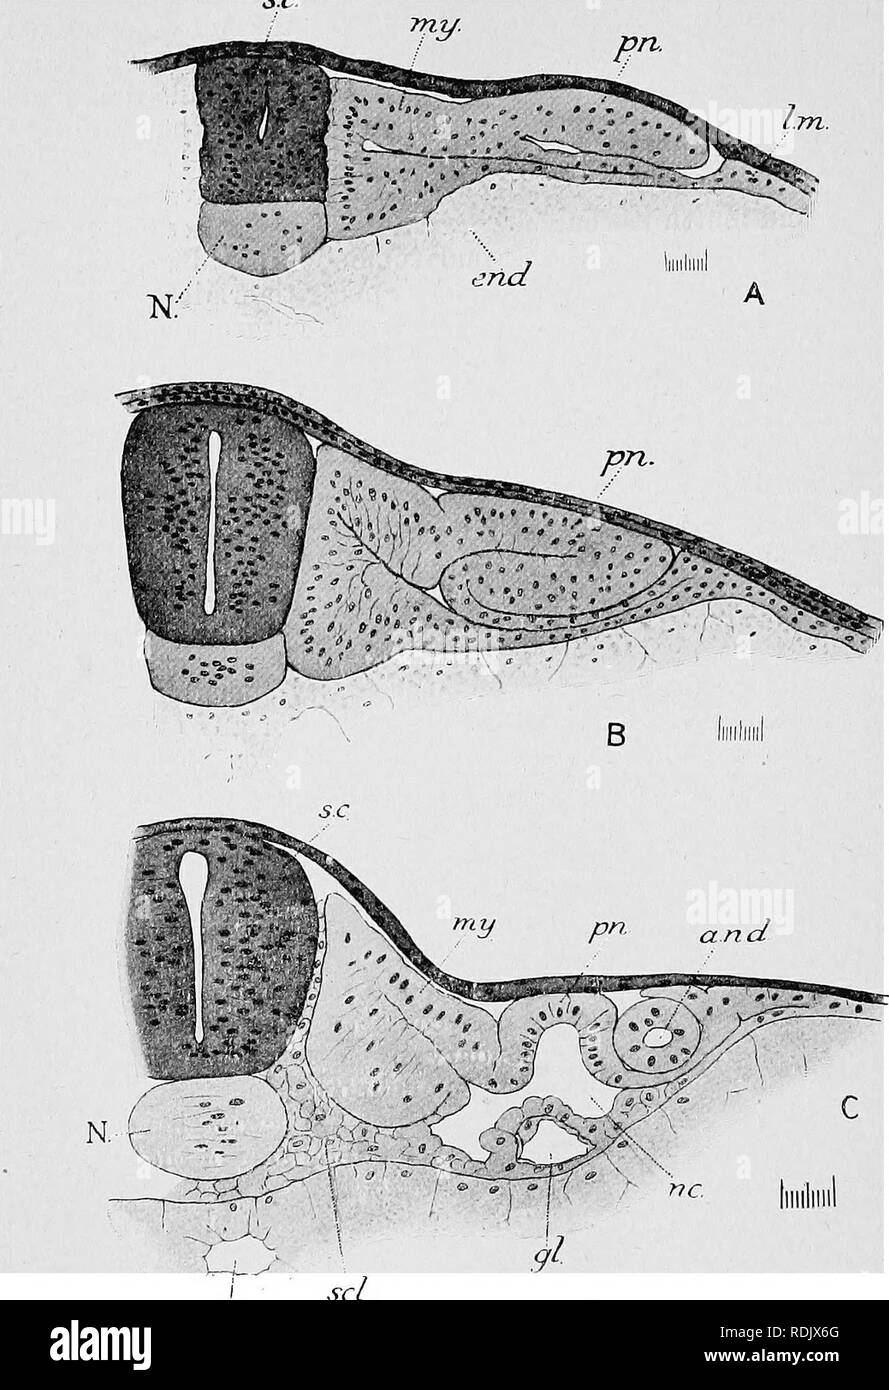 . Text-book of embryology. Embryology. 232 EMBRYOLOGY OF THE LOWER VERTEBRATES ch. it is only when nephrocoeles begin to appear (in the regions of the sc mi/. pn.. ent. Fig. 129.—Development of the pronephros in Lepidosiren as shown in transverse sections. A, stage 21; B, stage 21; C, stage 24 + . a.n.d, archinephric duct; end, endoderm; ent, enteric cavity ; gl, glomerulus ; l.m, lateral mesoderm ; myj myotome ; N, notochord ; nc, nephrocoele ; pw proDephric tubule ; s.c, spinal cord ; sel, sclerotome. fifth and sixth segments) that the segmented nature of the rudiment. Please note that these Stock Photo